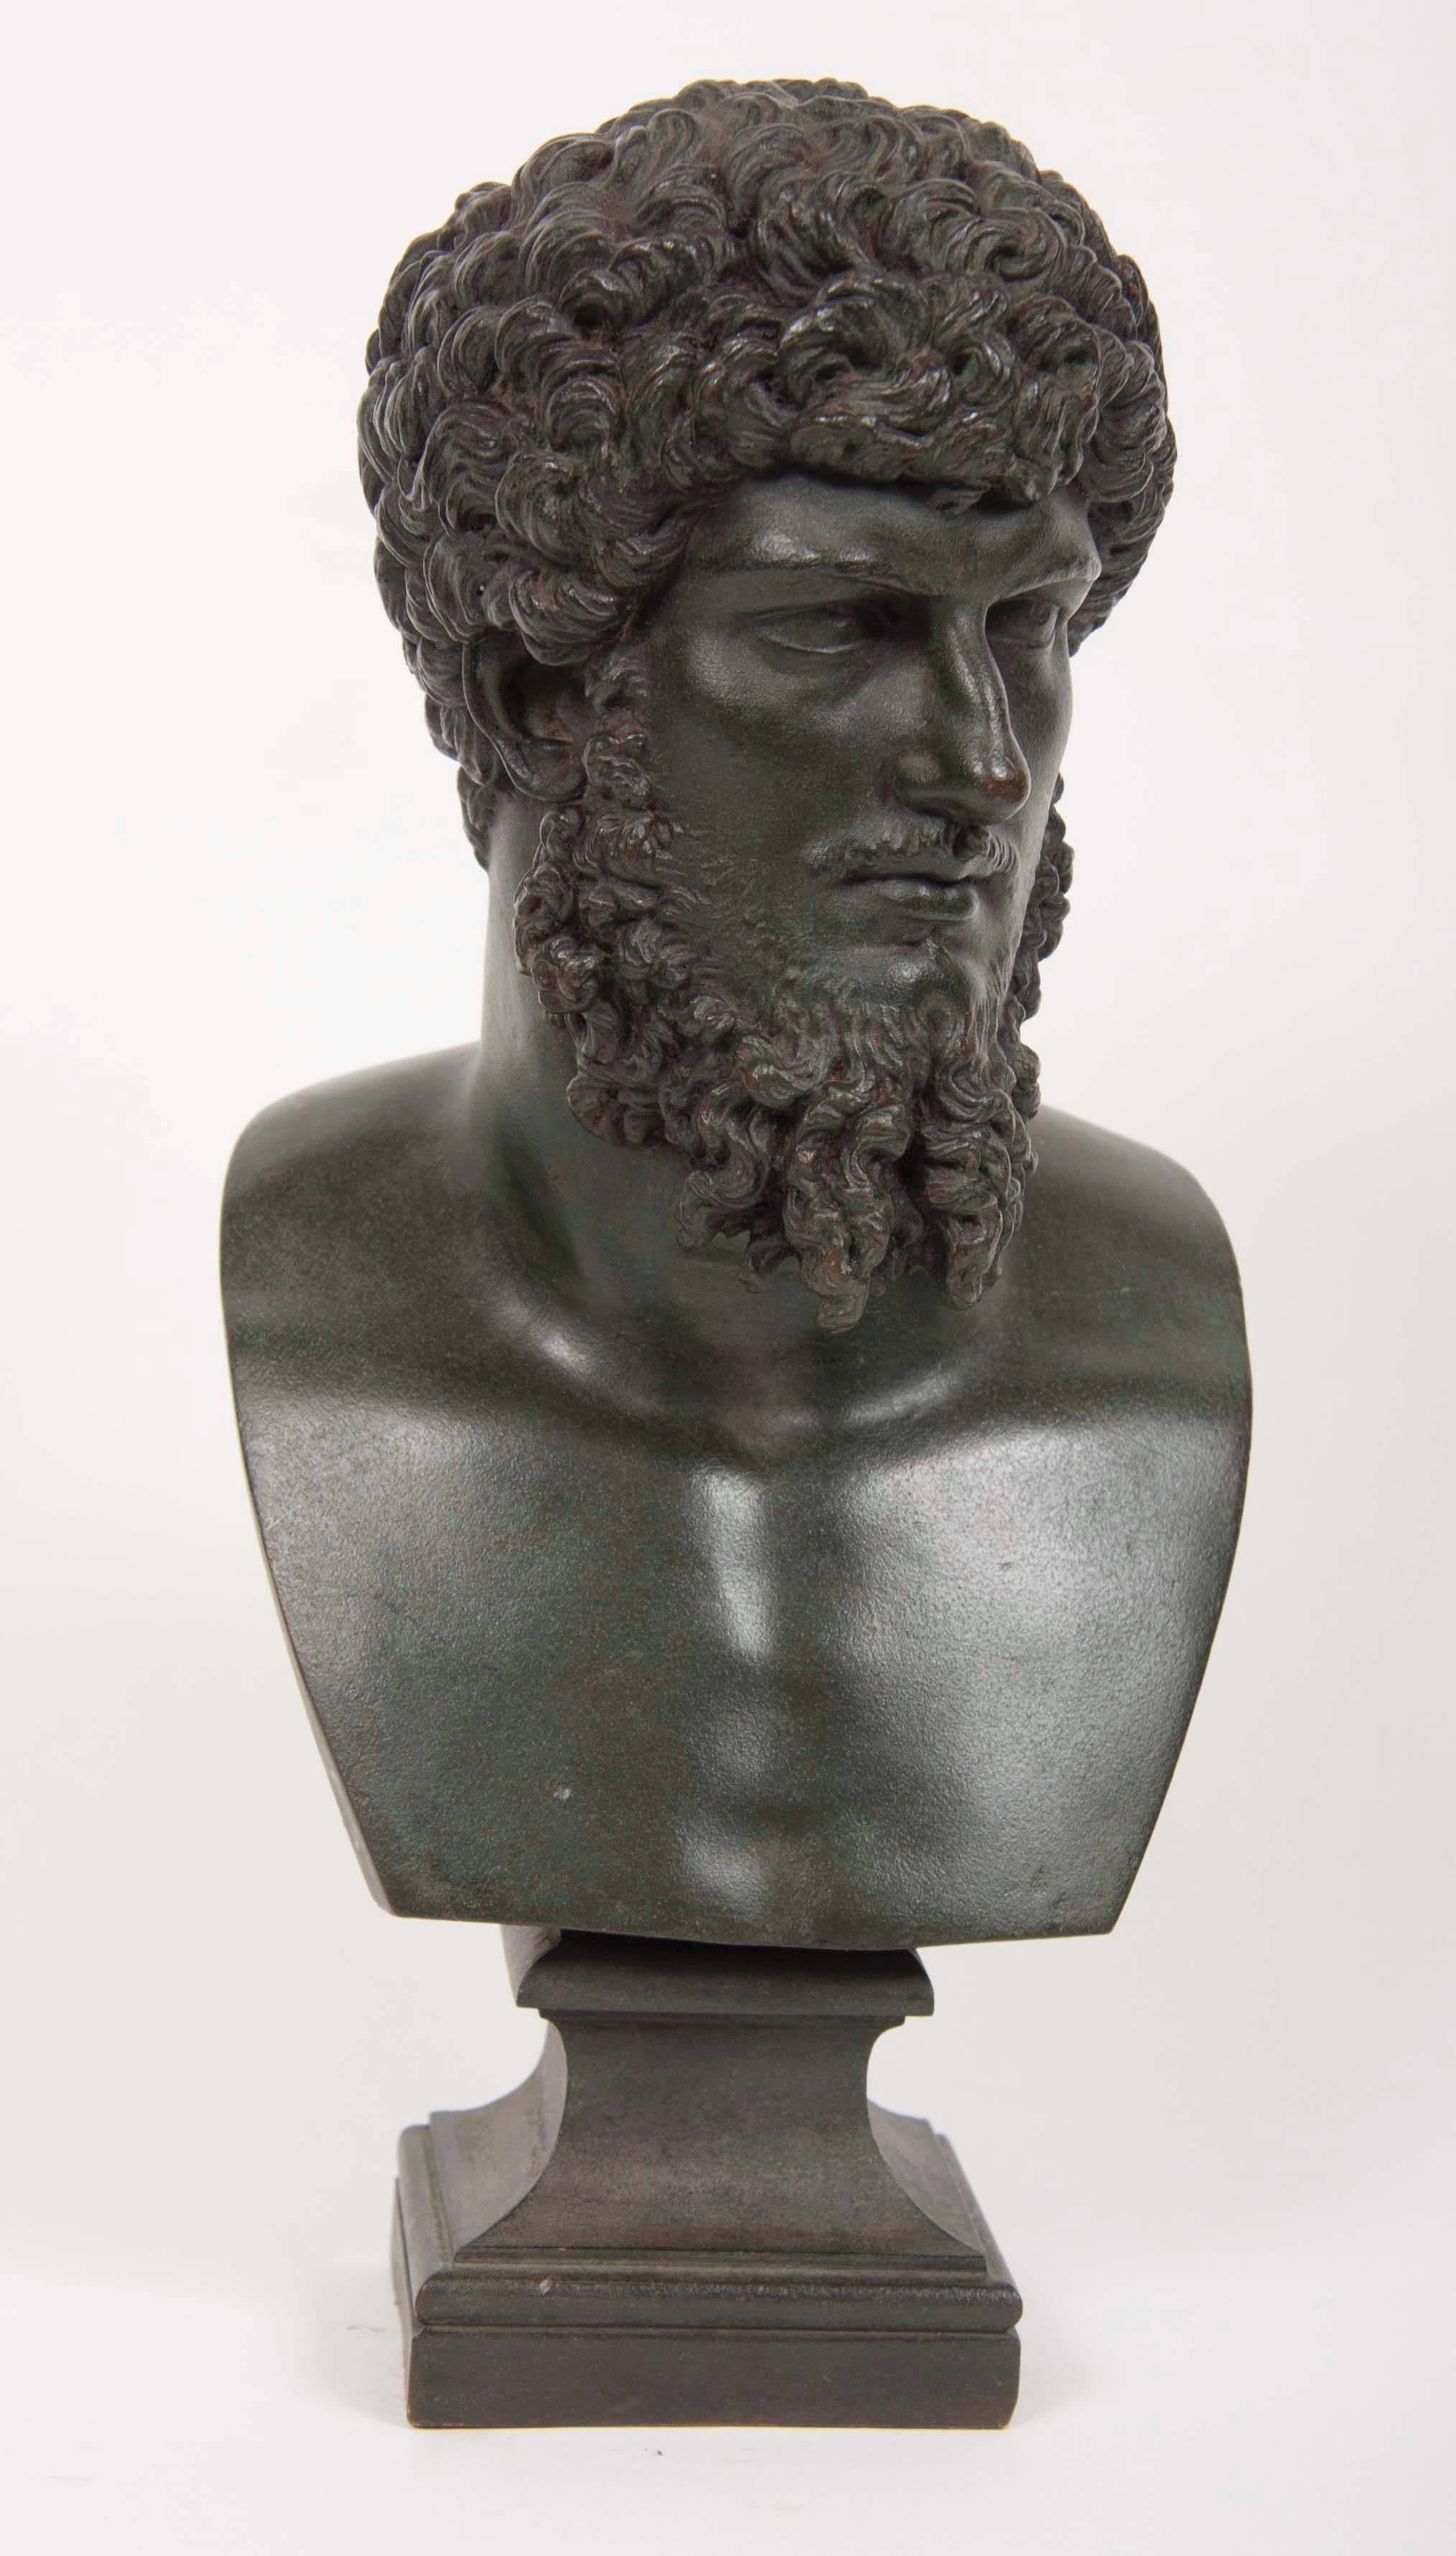 A 19th century grand Tour patinated bronze bust of Lucious Verus.